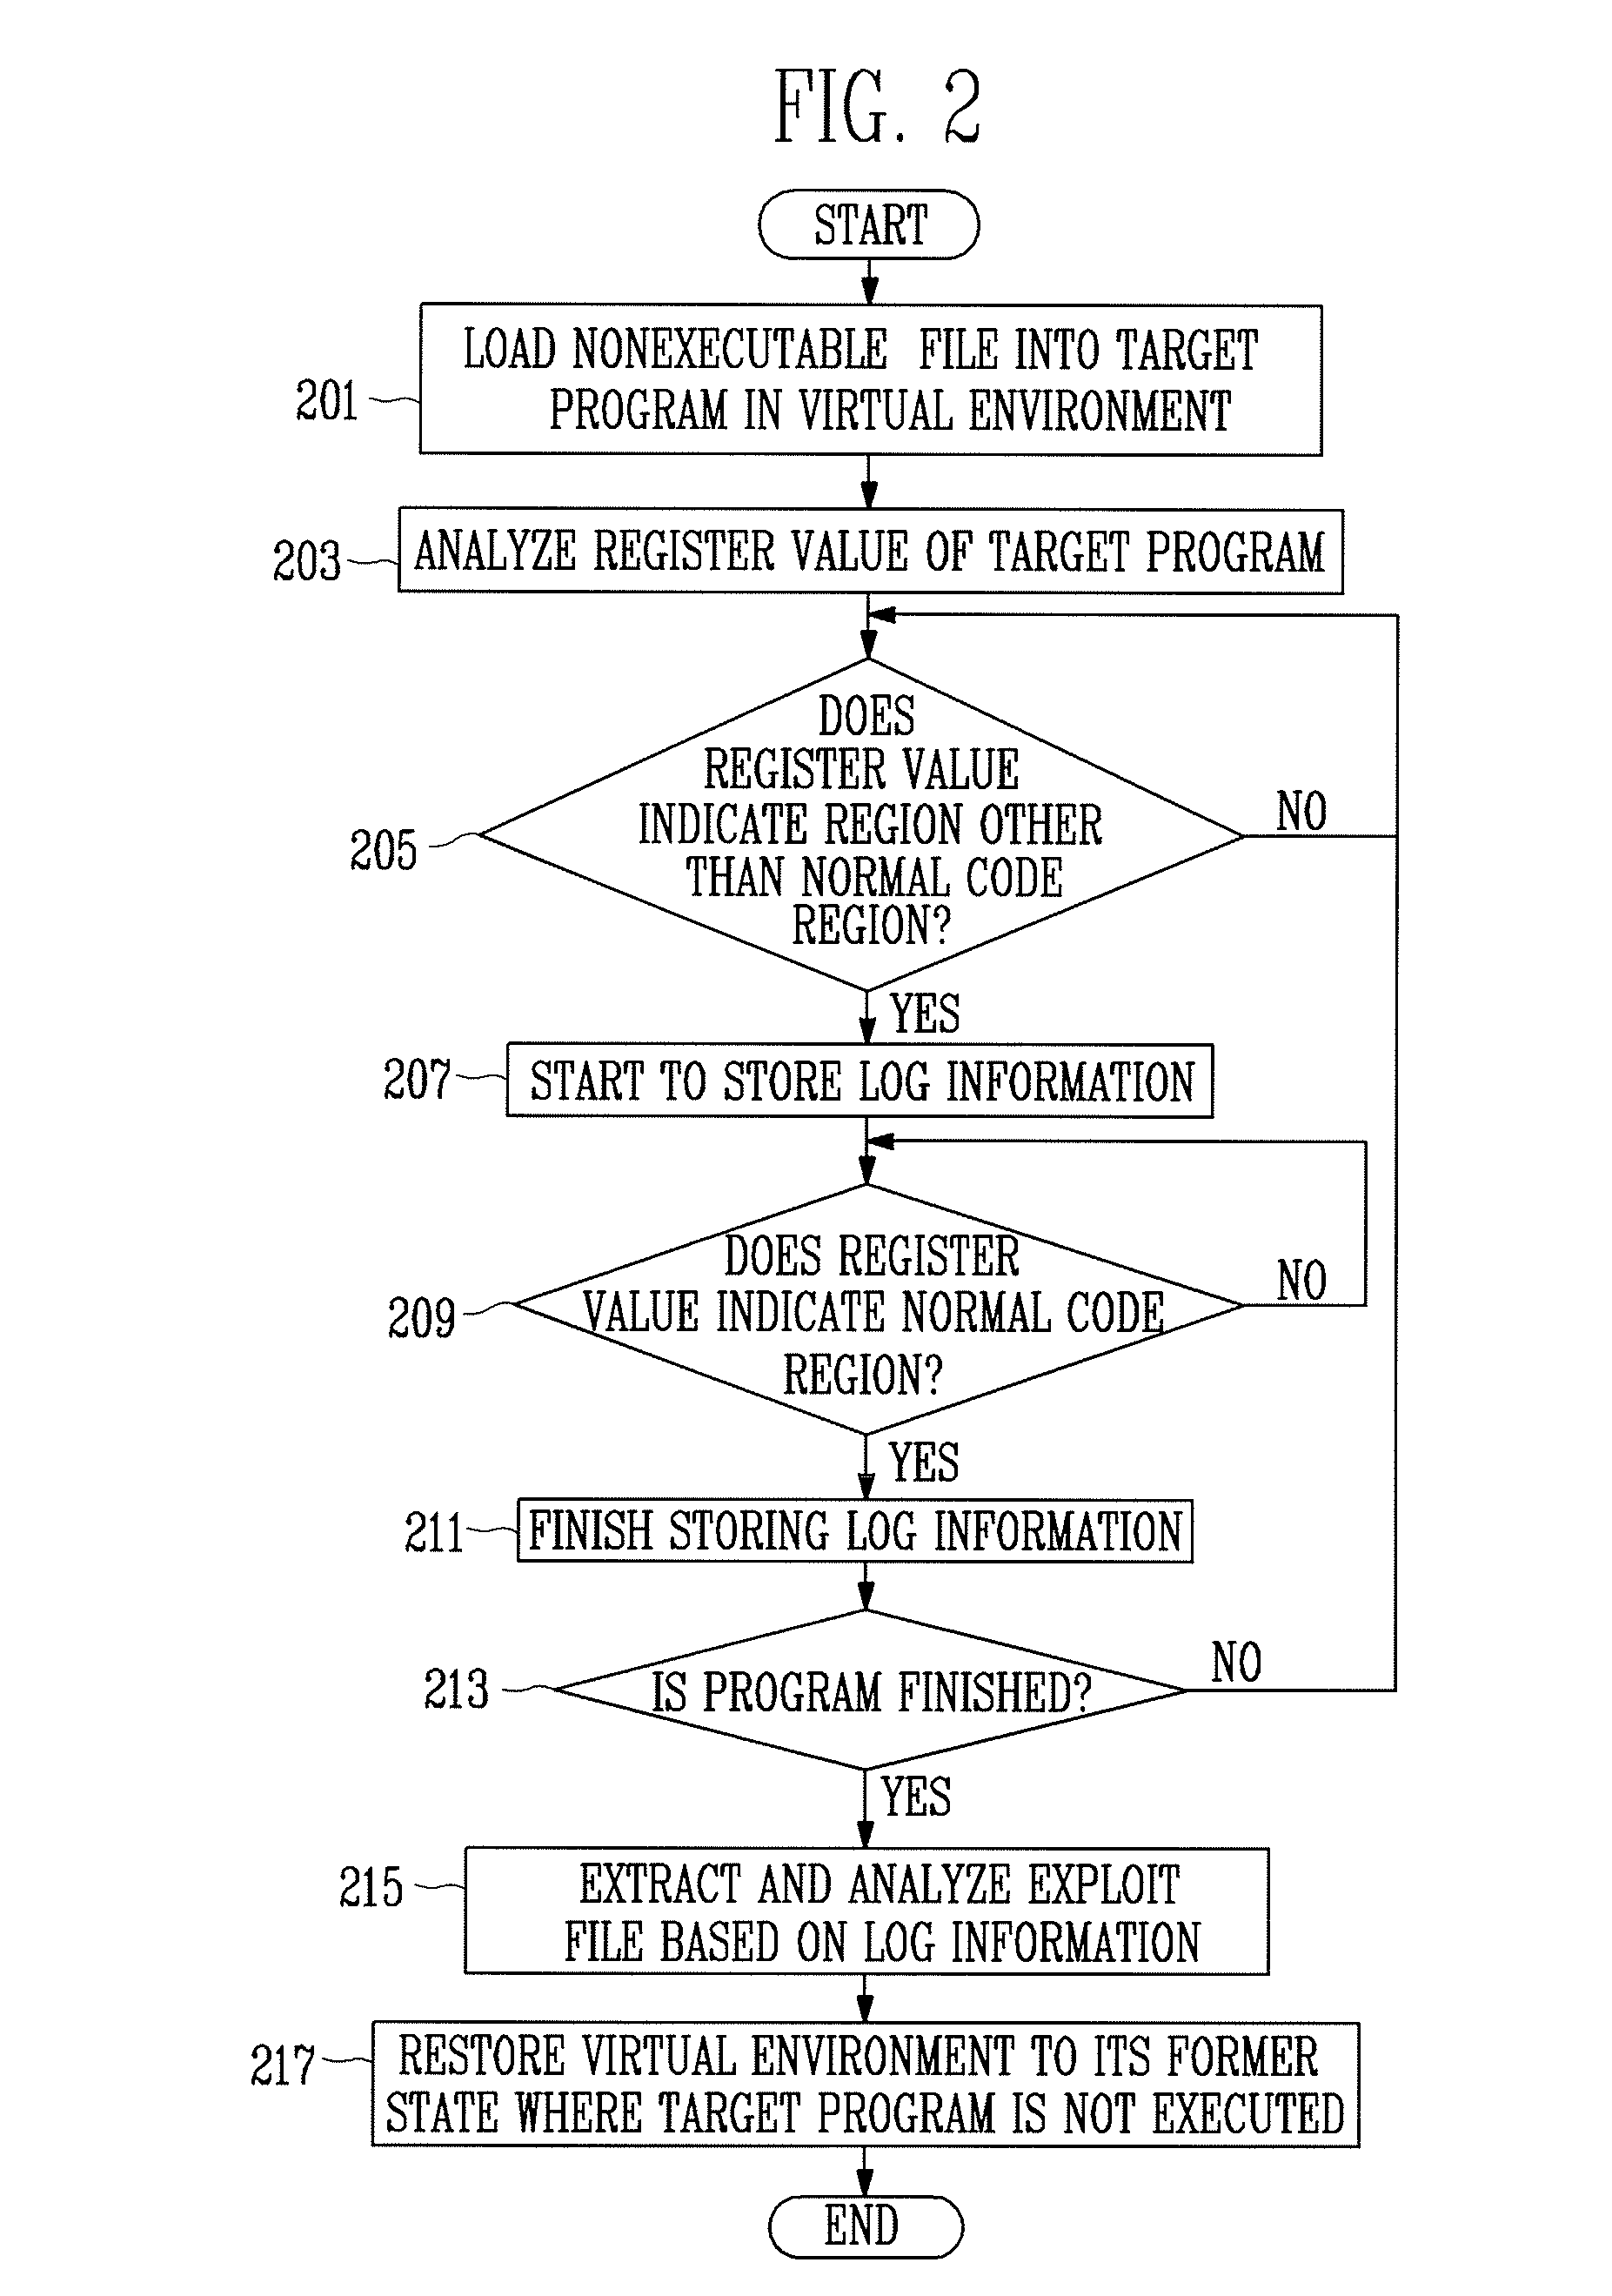 Method and apparatus for analyzing exploit code in nonexecutable file using virtual environment